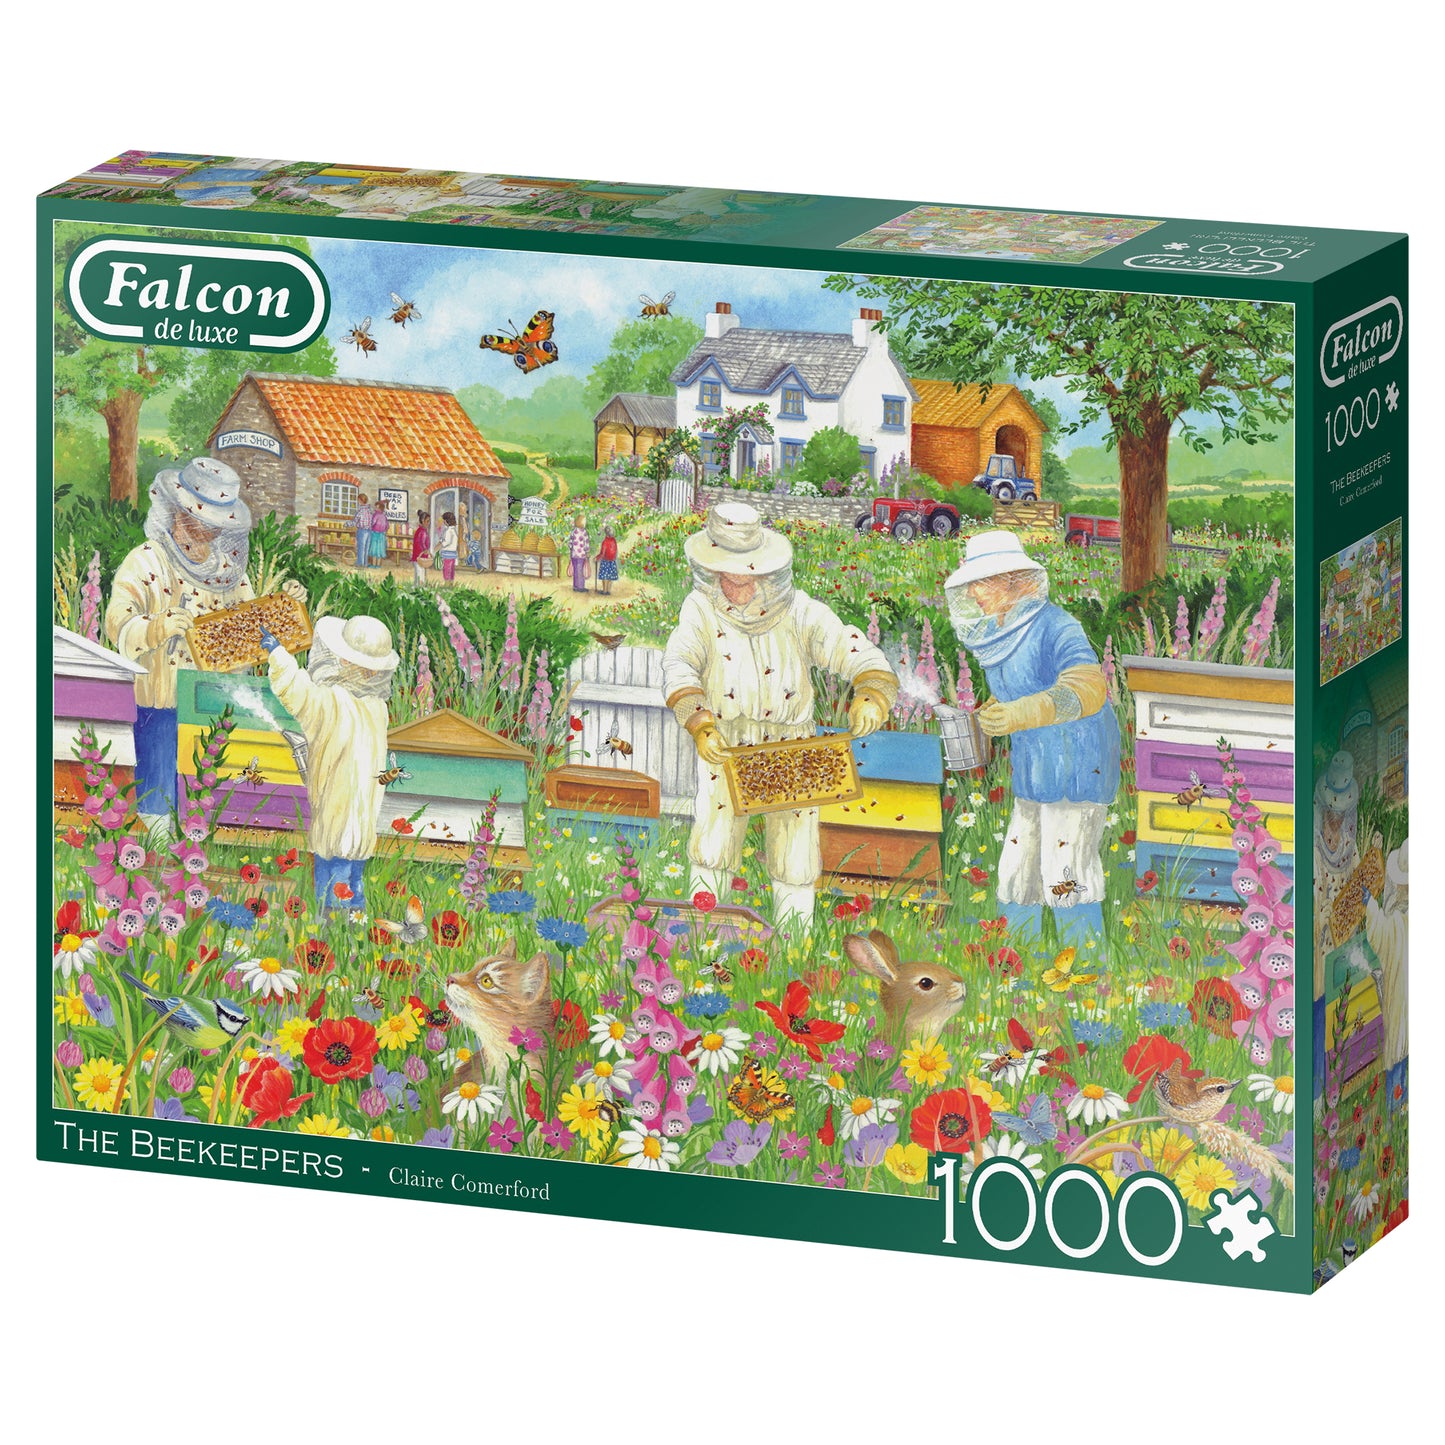 Falcon - The Beekeepers (1000 pieces) - product image - Jumboplay.com